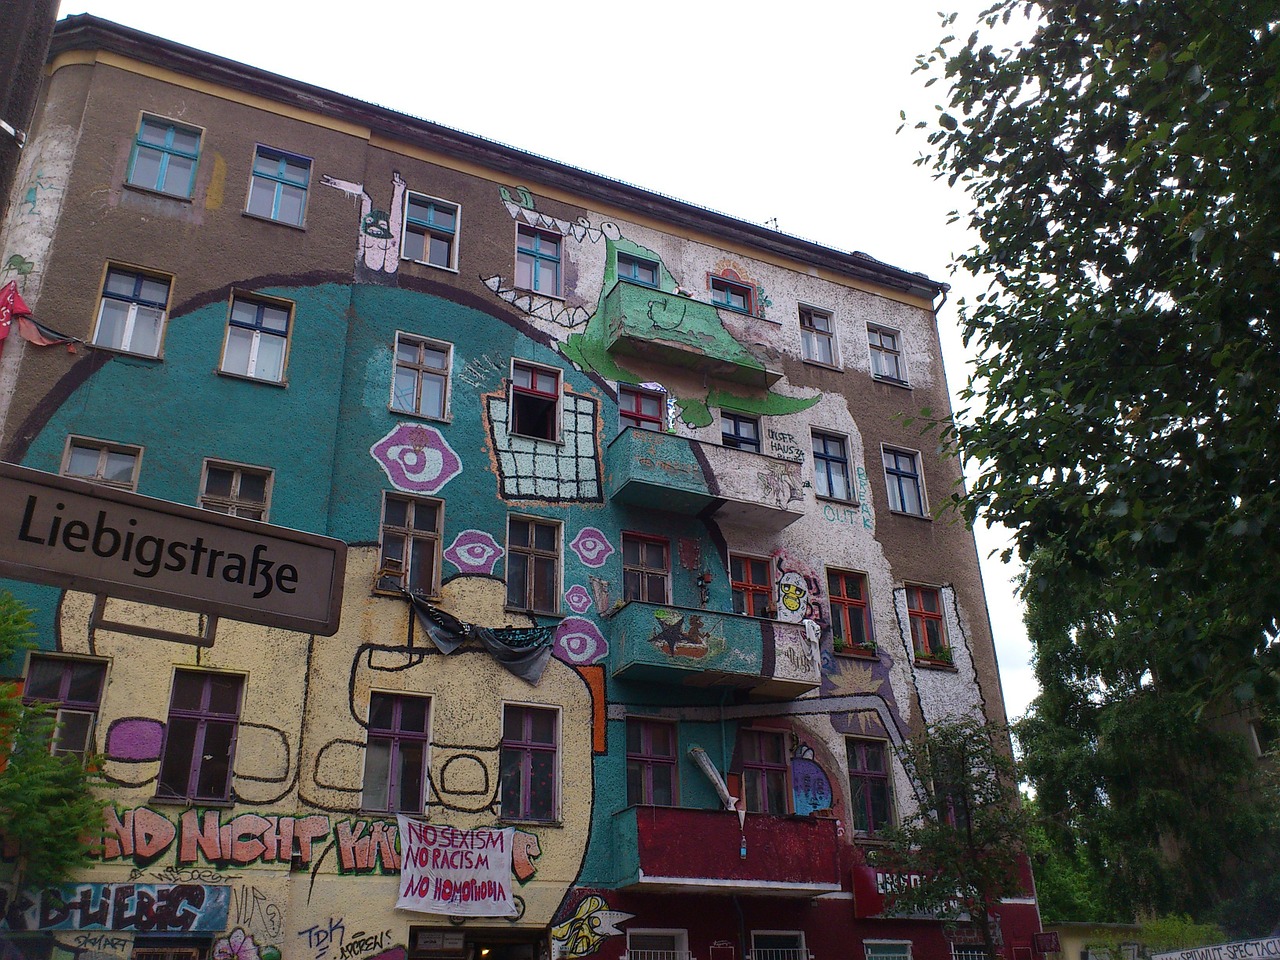 A building covered in graffiti from a neighborhood in Berlin